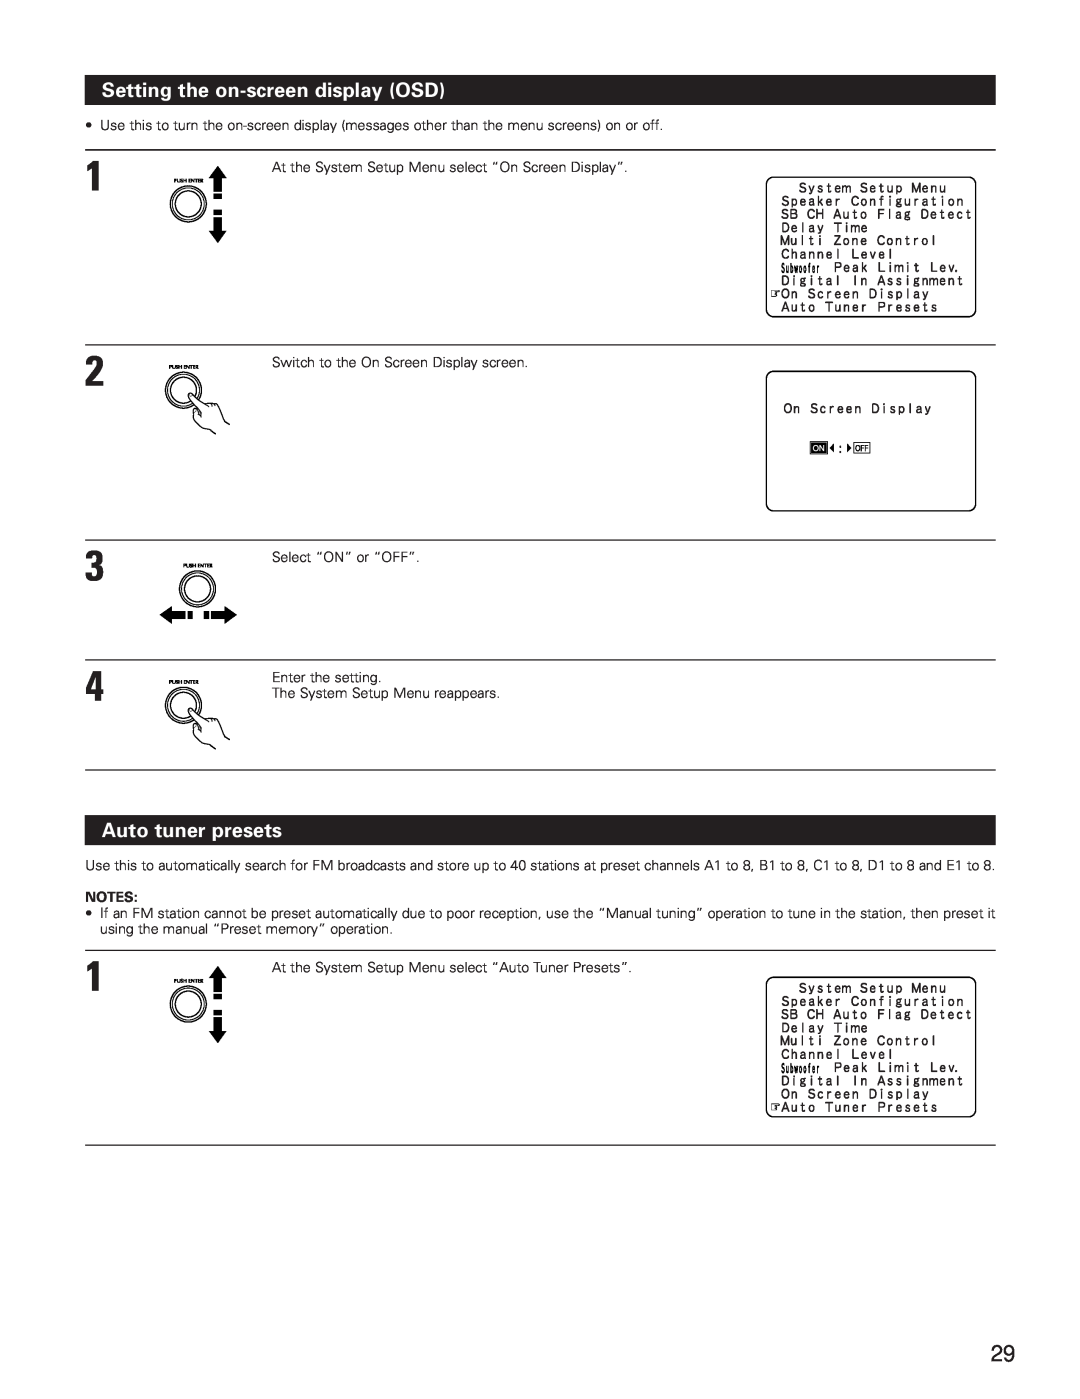 Denon AVR-5800 operating instructions Setting the on-screendisplay OSD, Auto tuner presets 